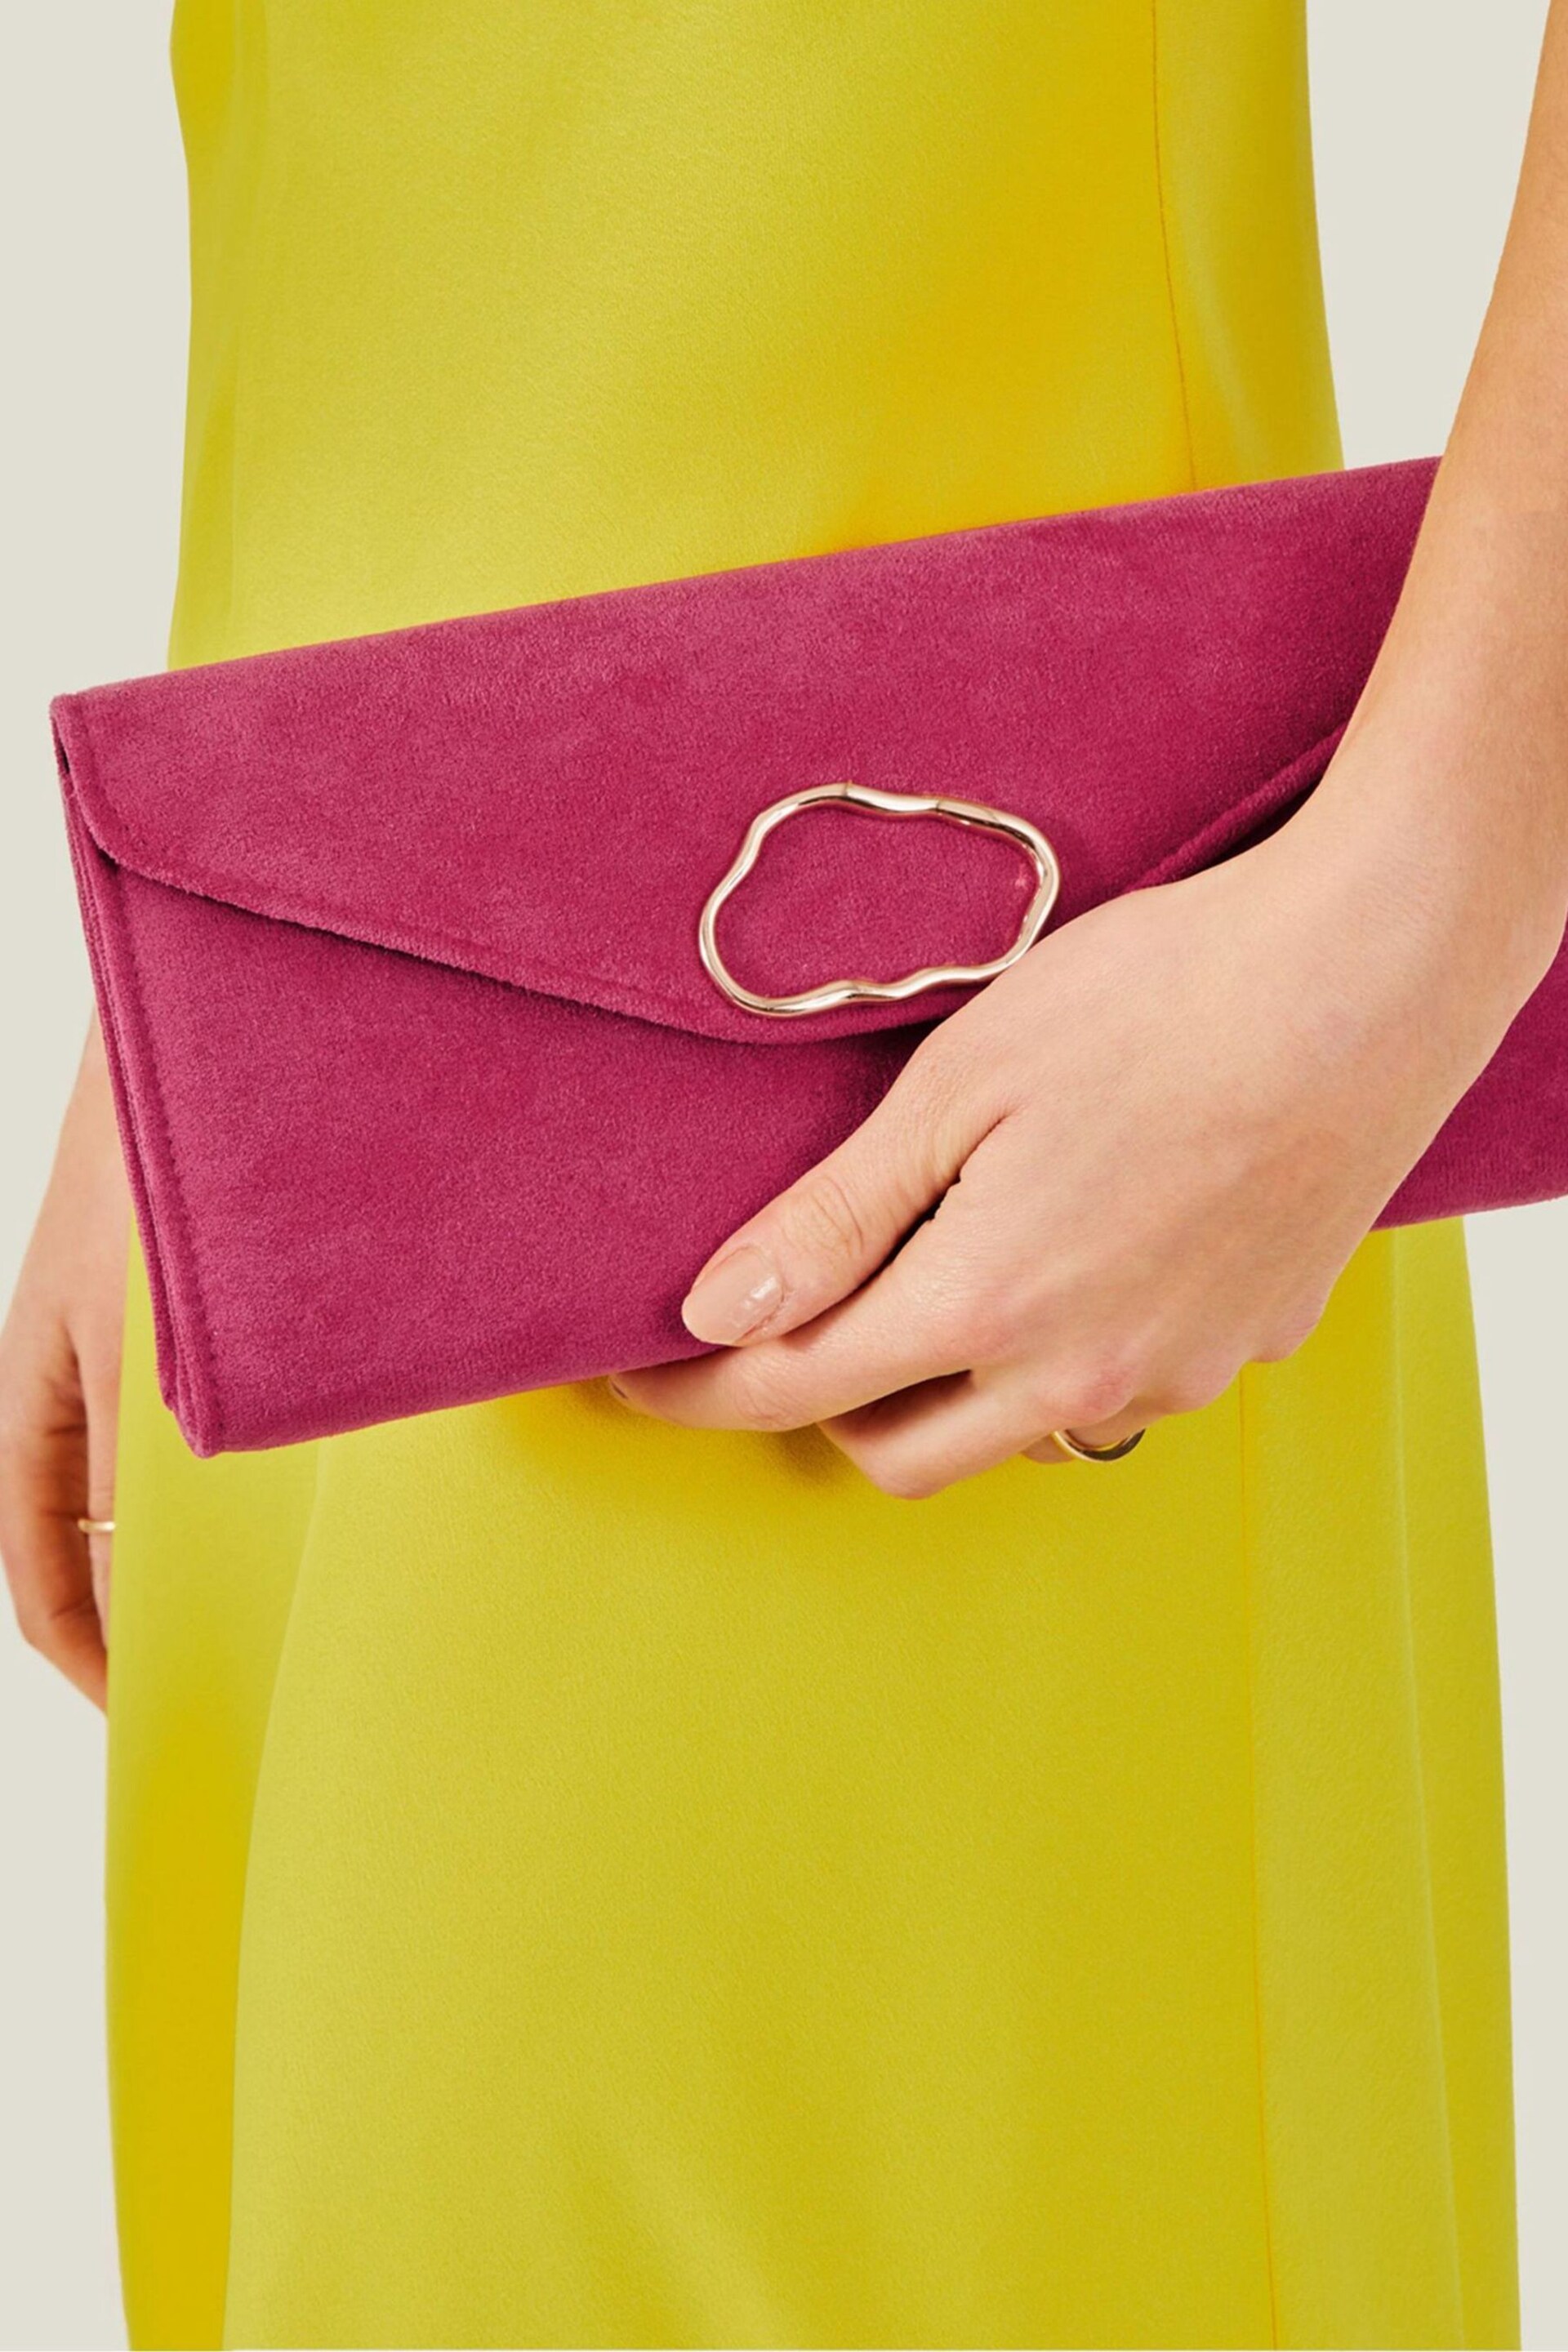 Accessorize Pink Suedette Box Clutch Bag - Image 1 of 4